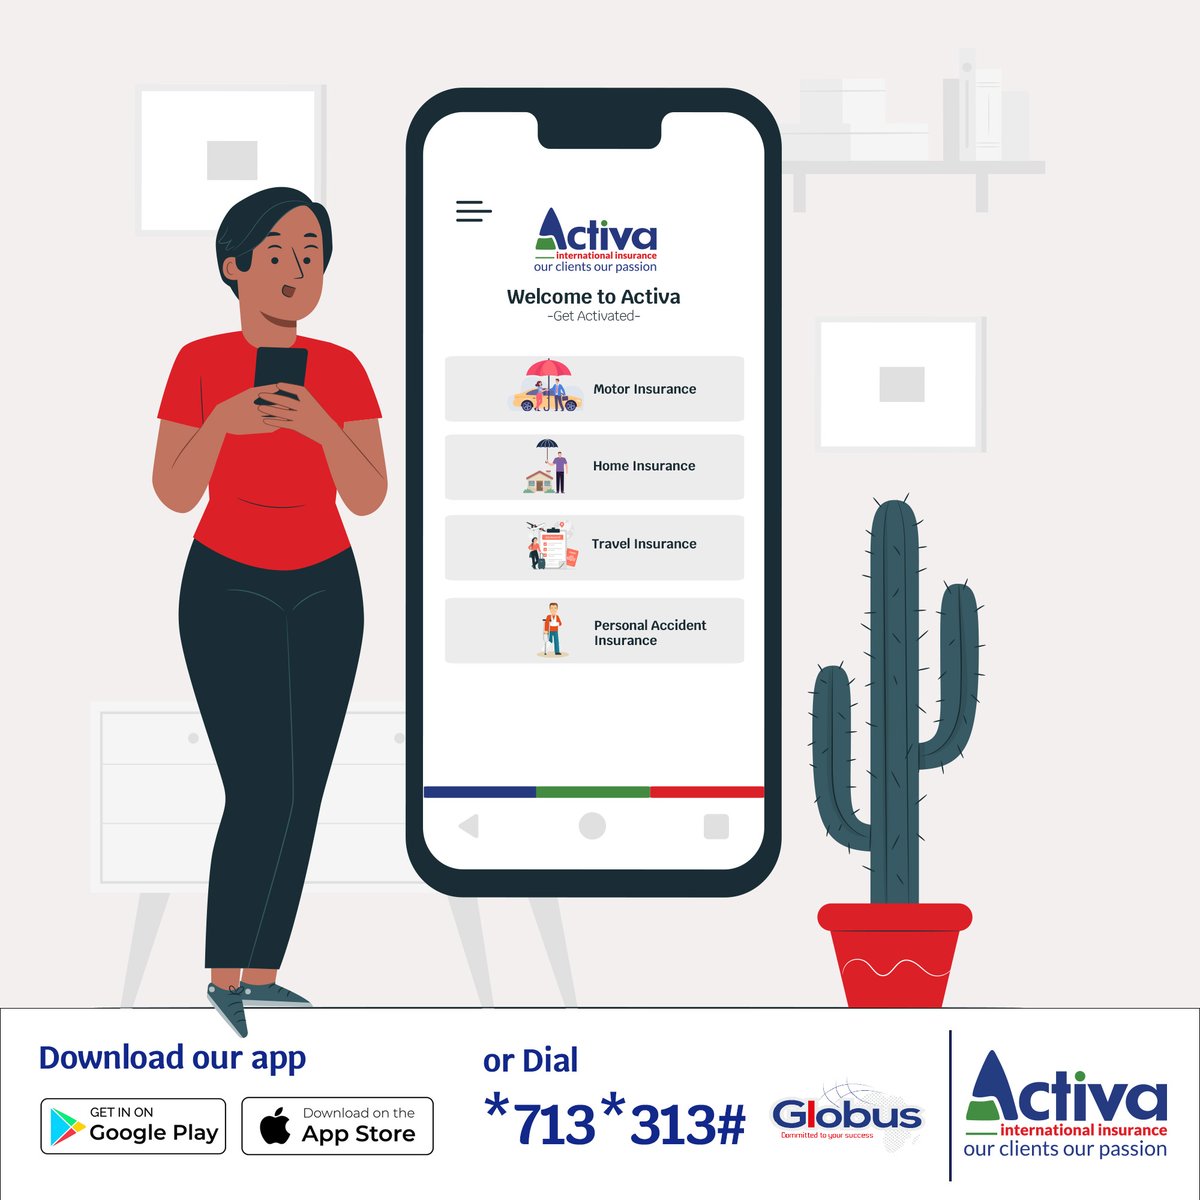 Manage your insurance on the go! 📱 Download the Activa International Insurance mobile app today and access your policies, file claims, and get instant assistance, all at your fingertips. 
#InsuranceApp #Convenience #MobileSolutions
....continue